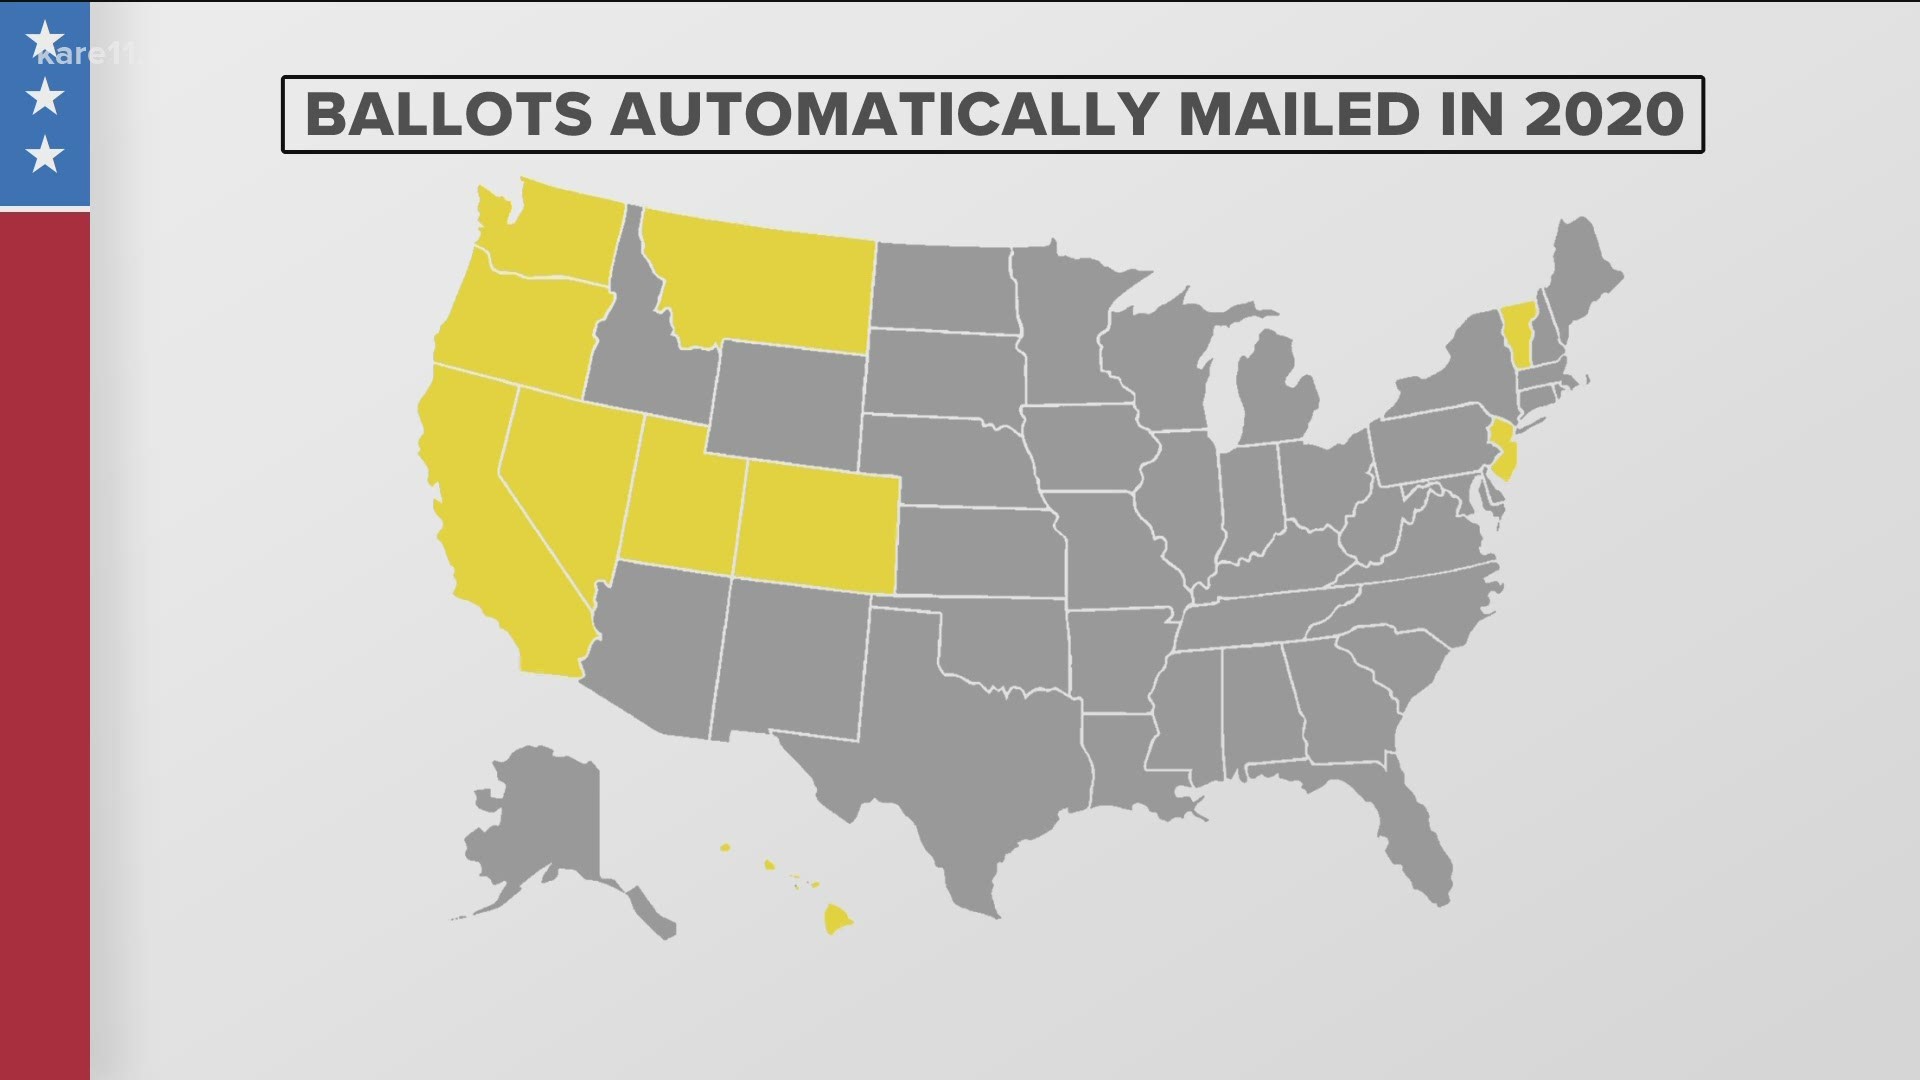 Some states are automatically mailing ballots, but Minnesotans must apply to receive an absentee ballot in the mail.